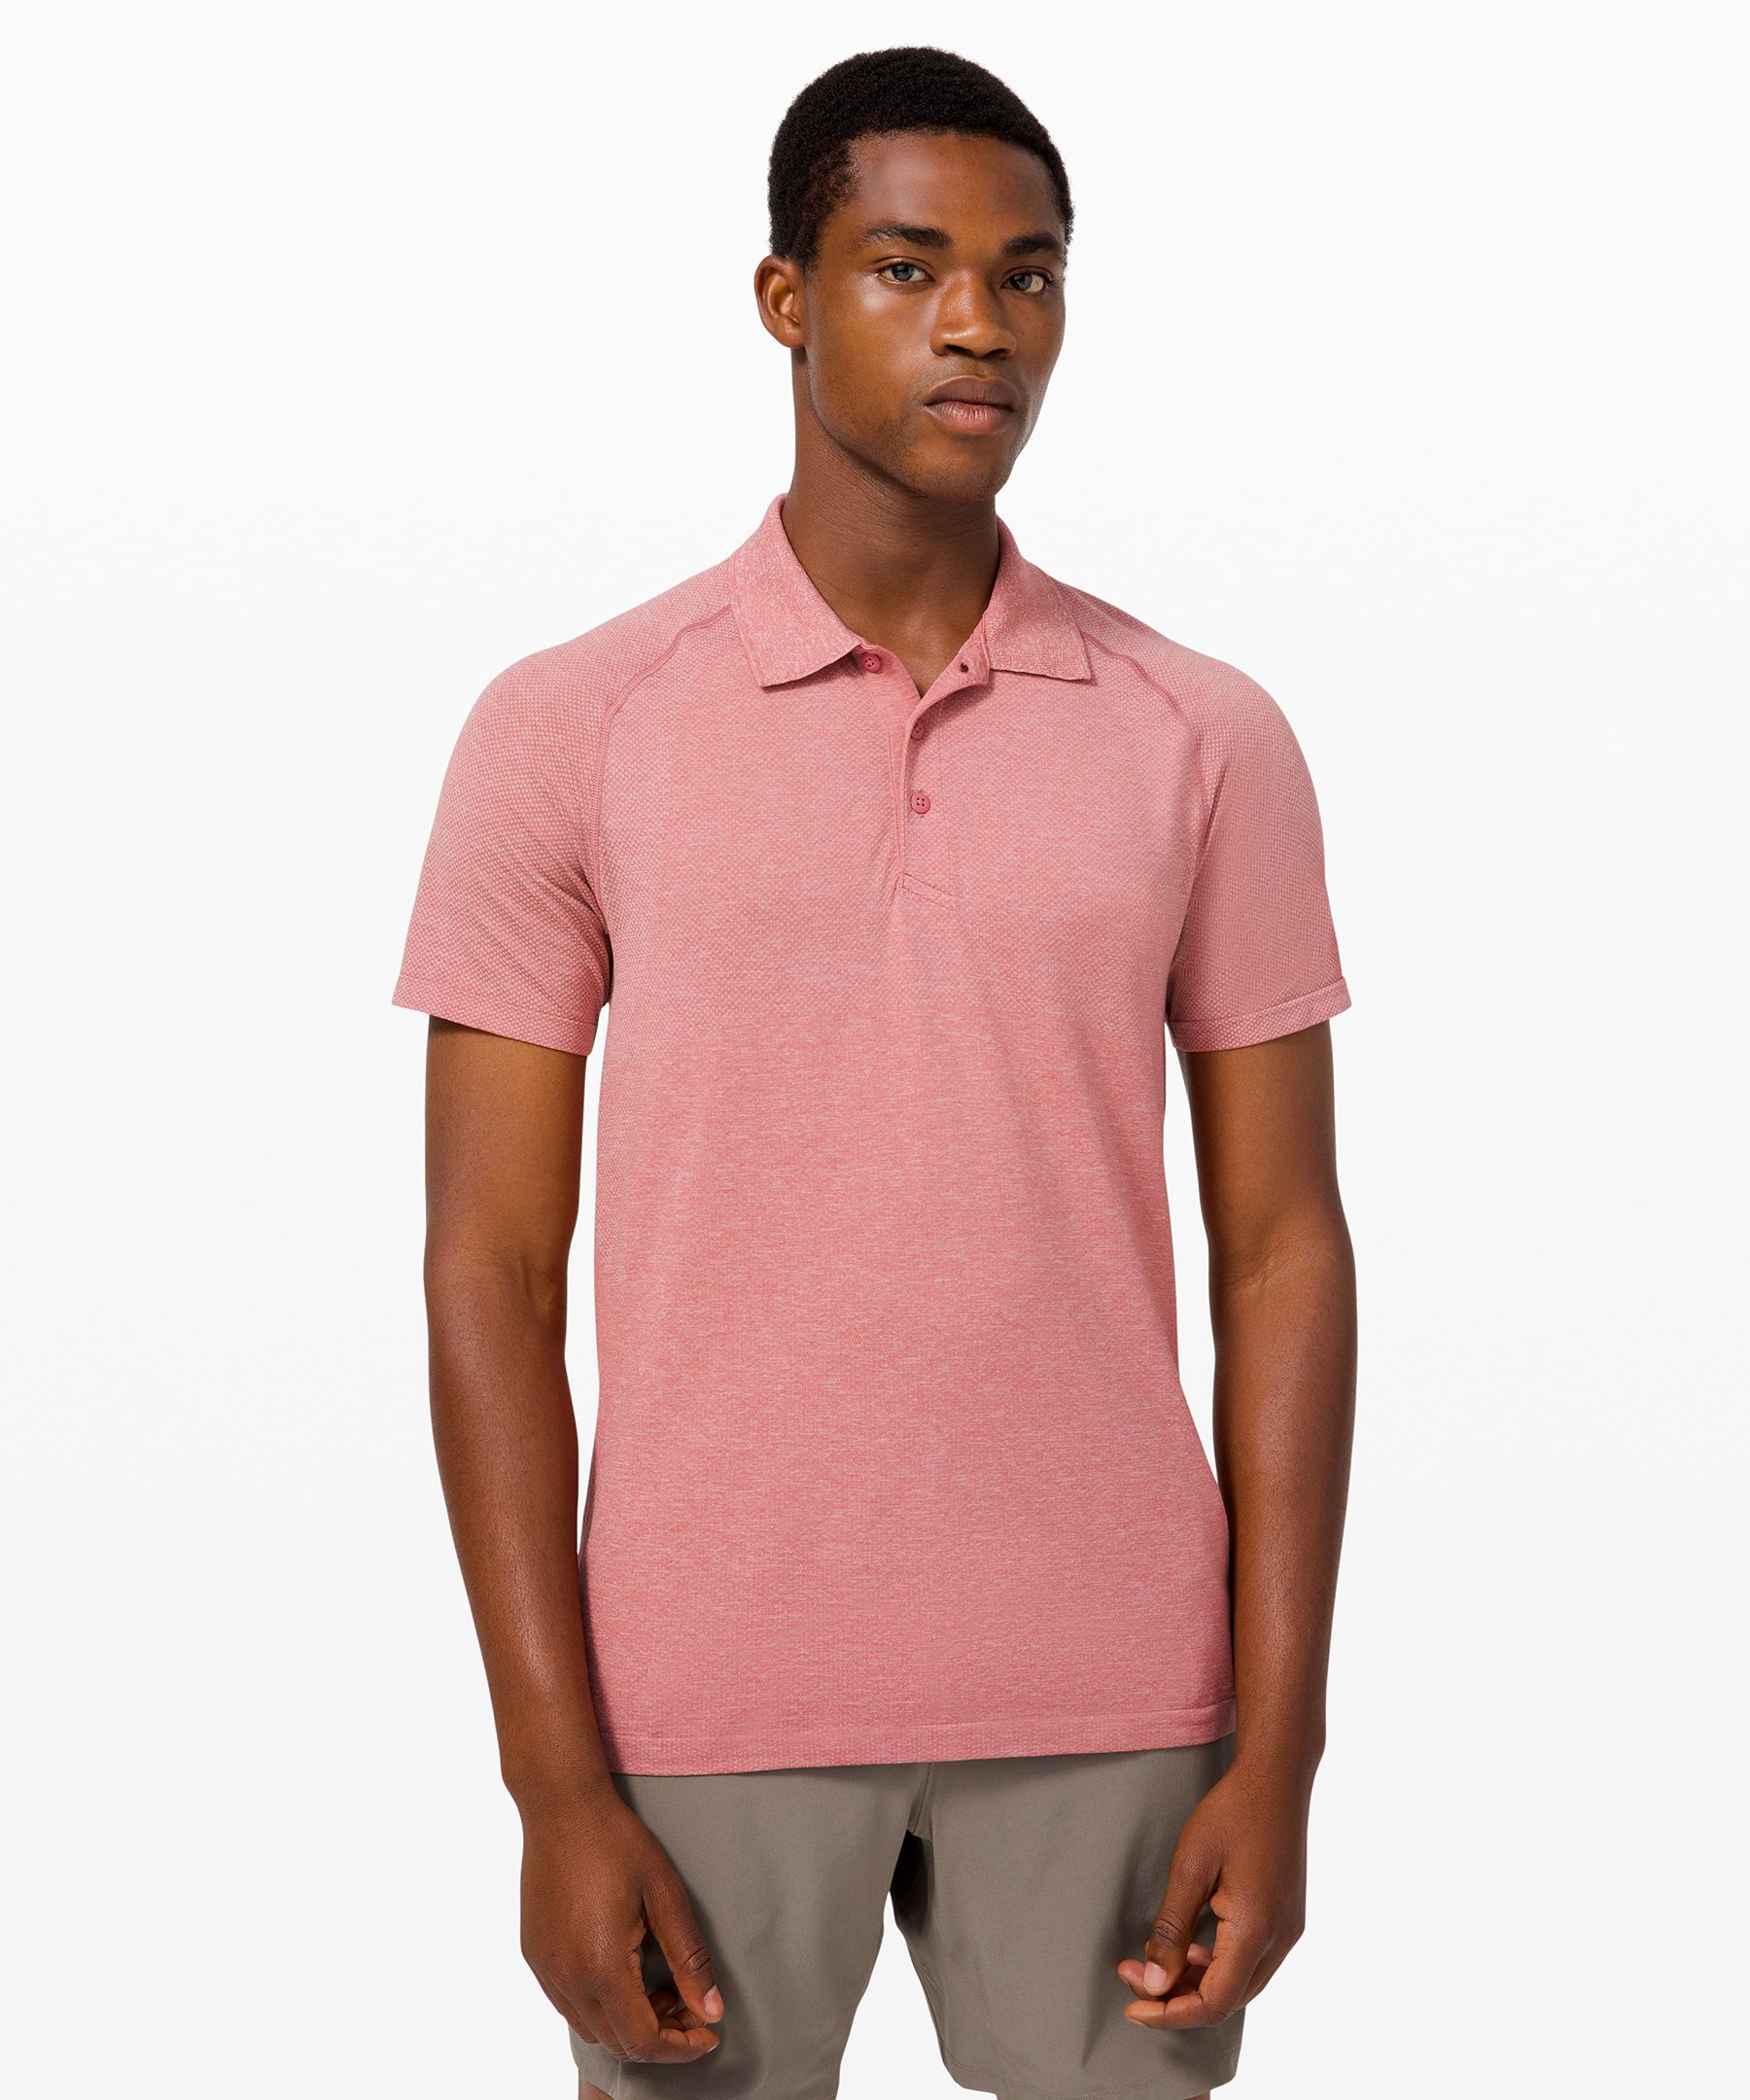 Lululemon Metal Vent Tech Polo 2.0 In Pink